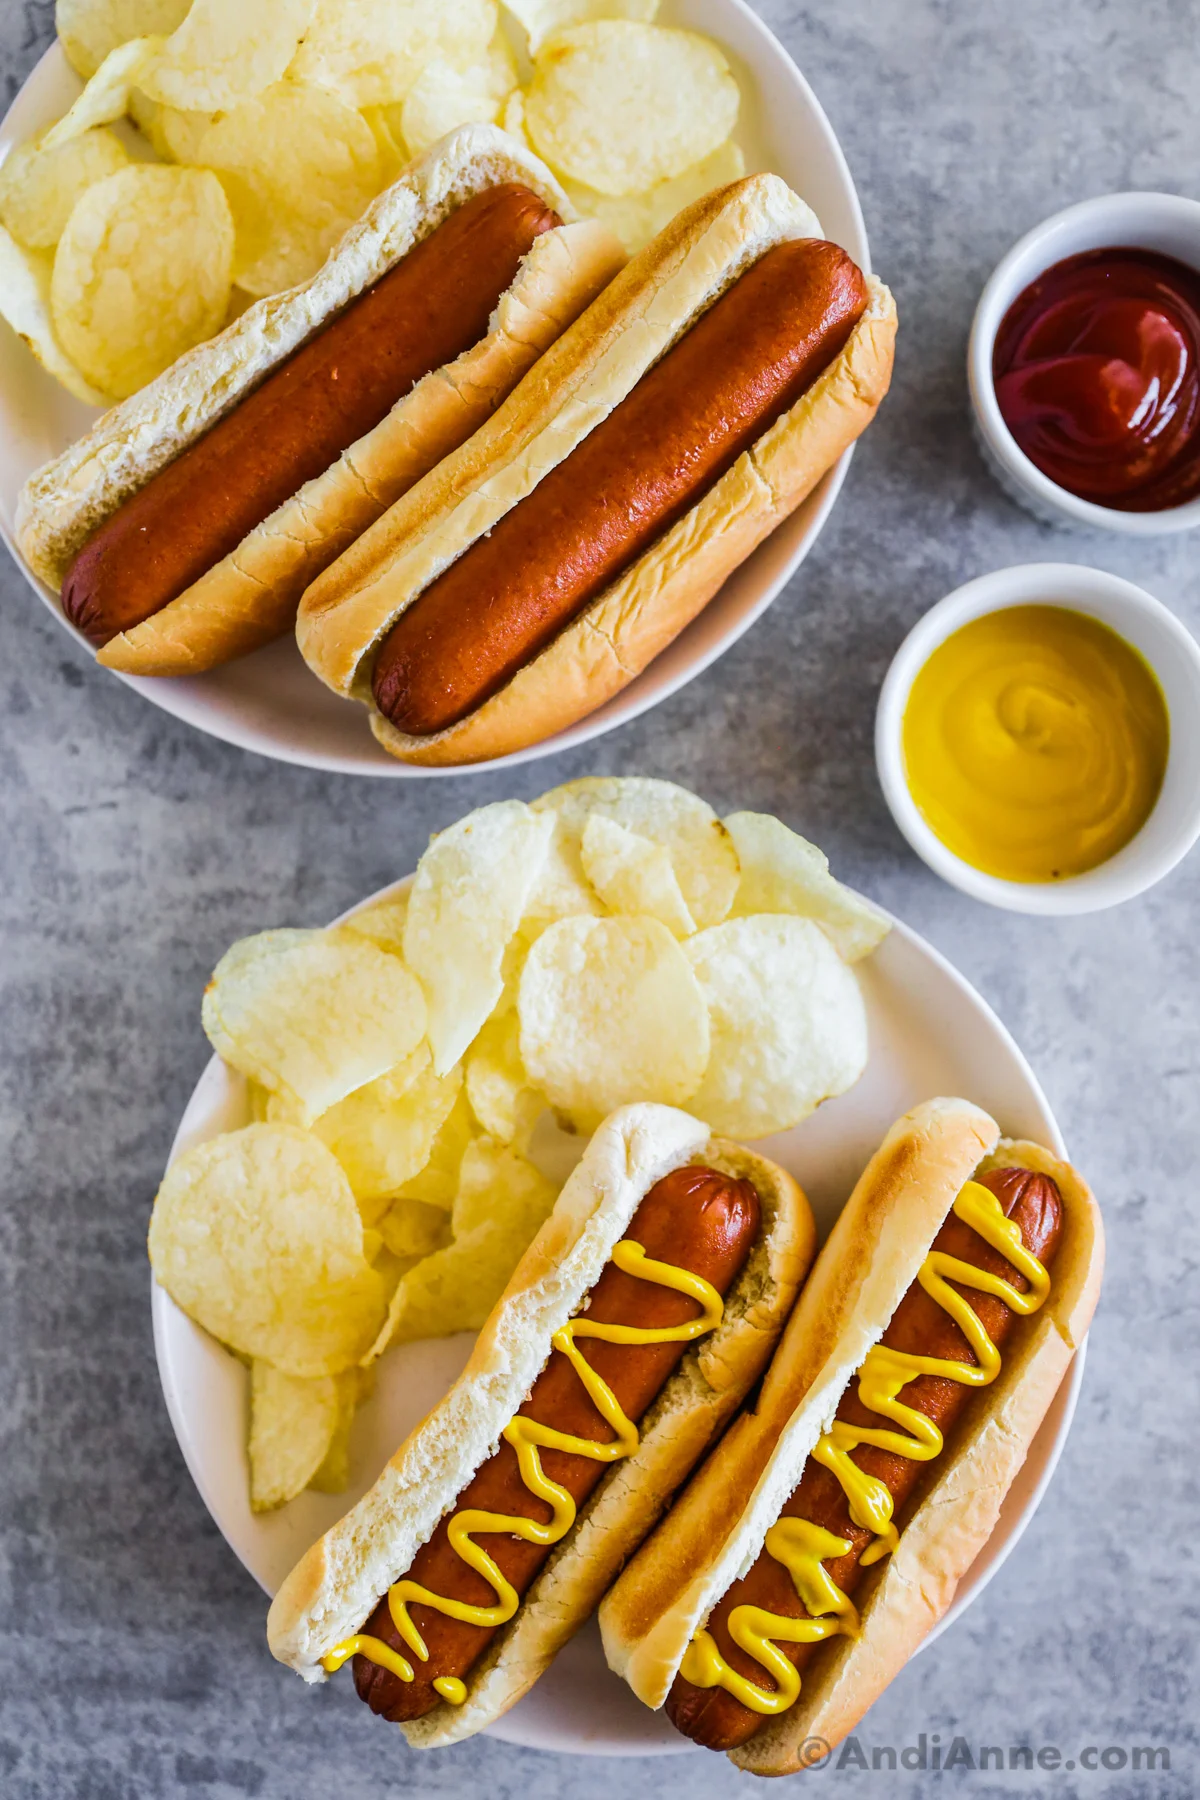 Two plates of with hot dogs and buns and chips, one with mustard on top. Two small bowls of ketchup and mustard beside.